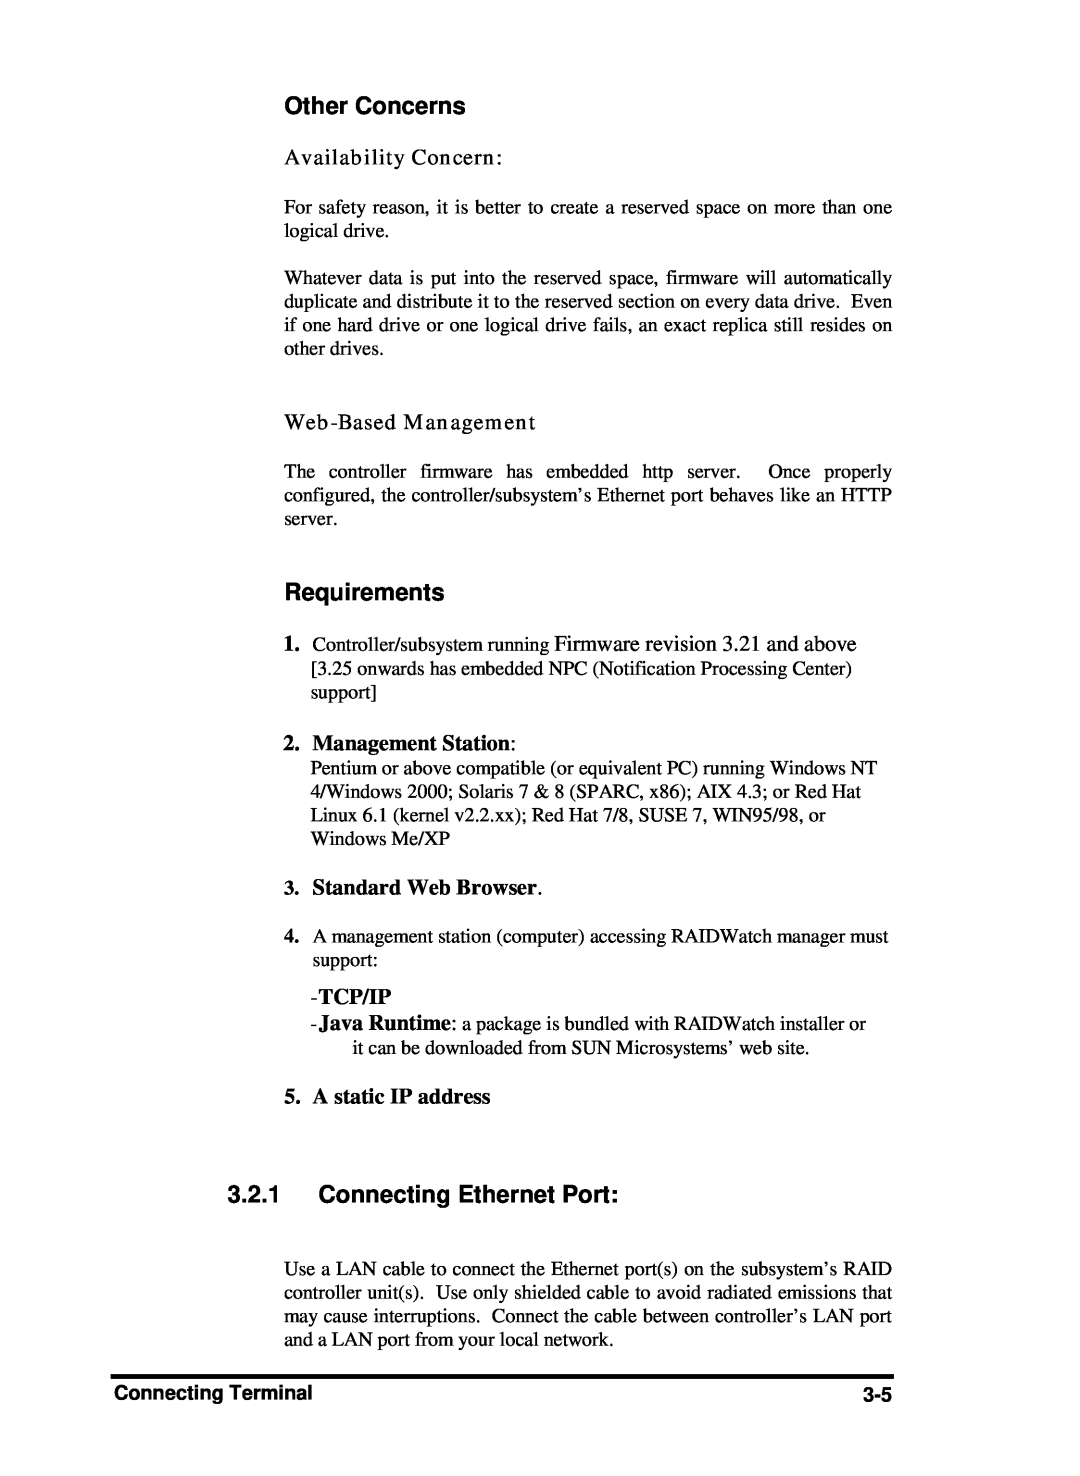 Compaq Infortrend manual Other Concerns, Requirements, Connecting Ethernet Port, Availability Concern, Web-Based Management 